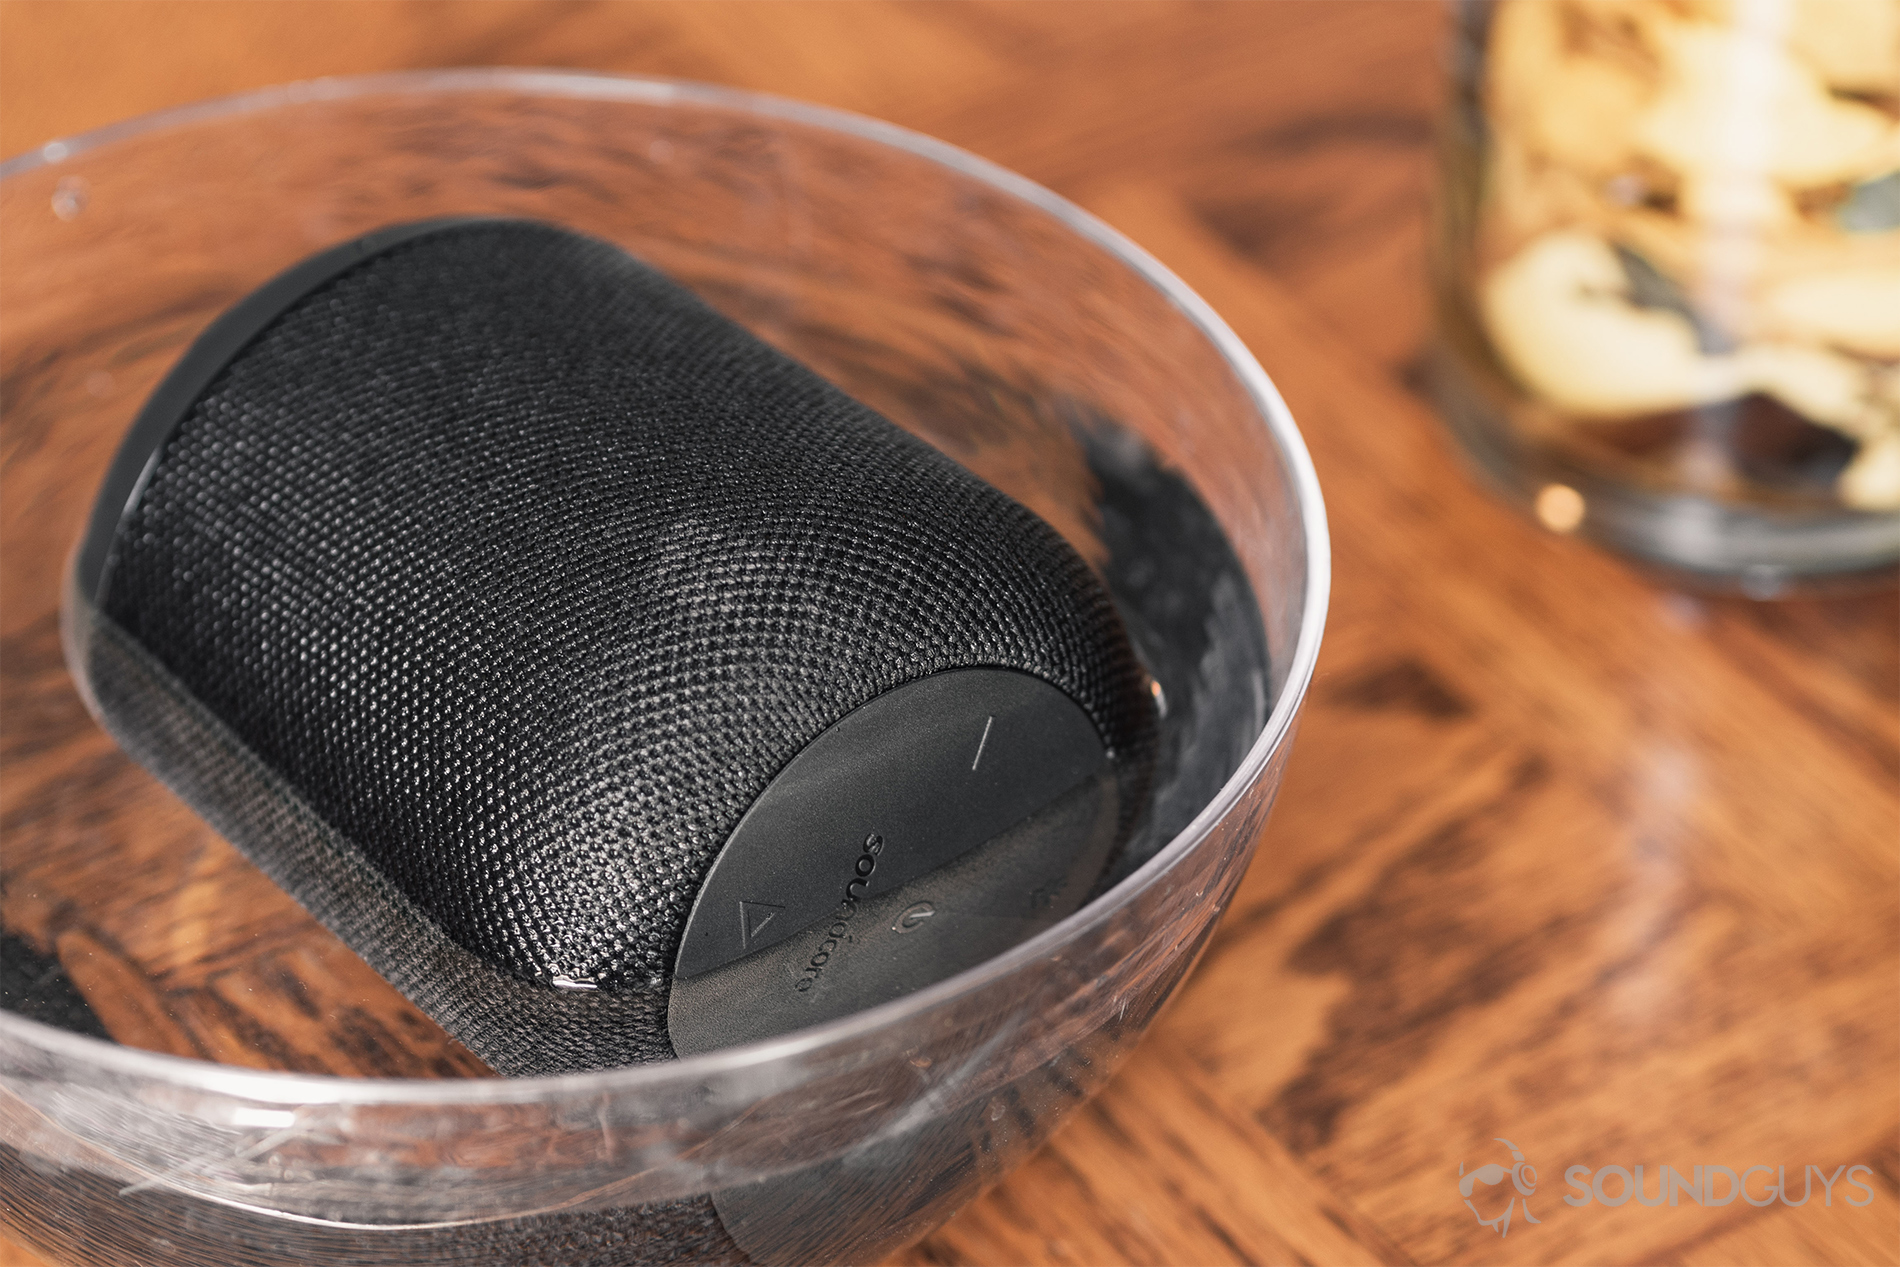 Anker Soundcore Motion Q review: The speaker submerged in a bowl of water.